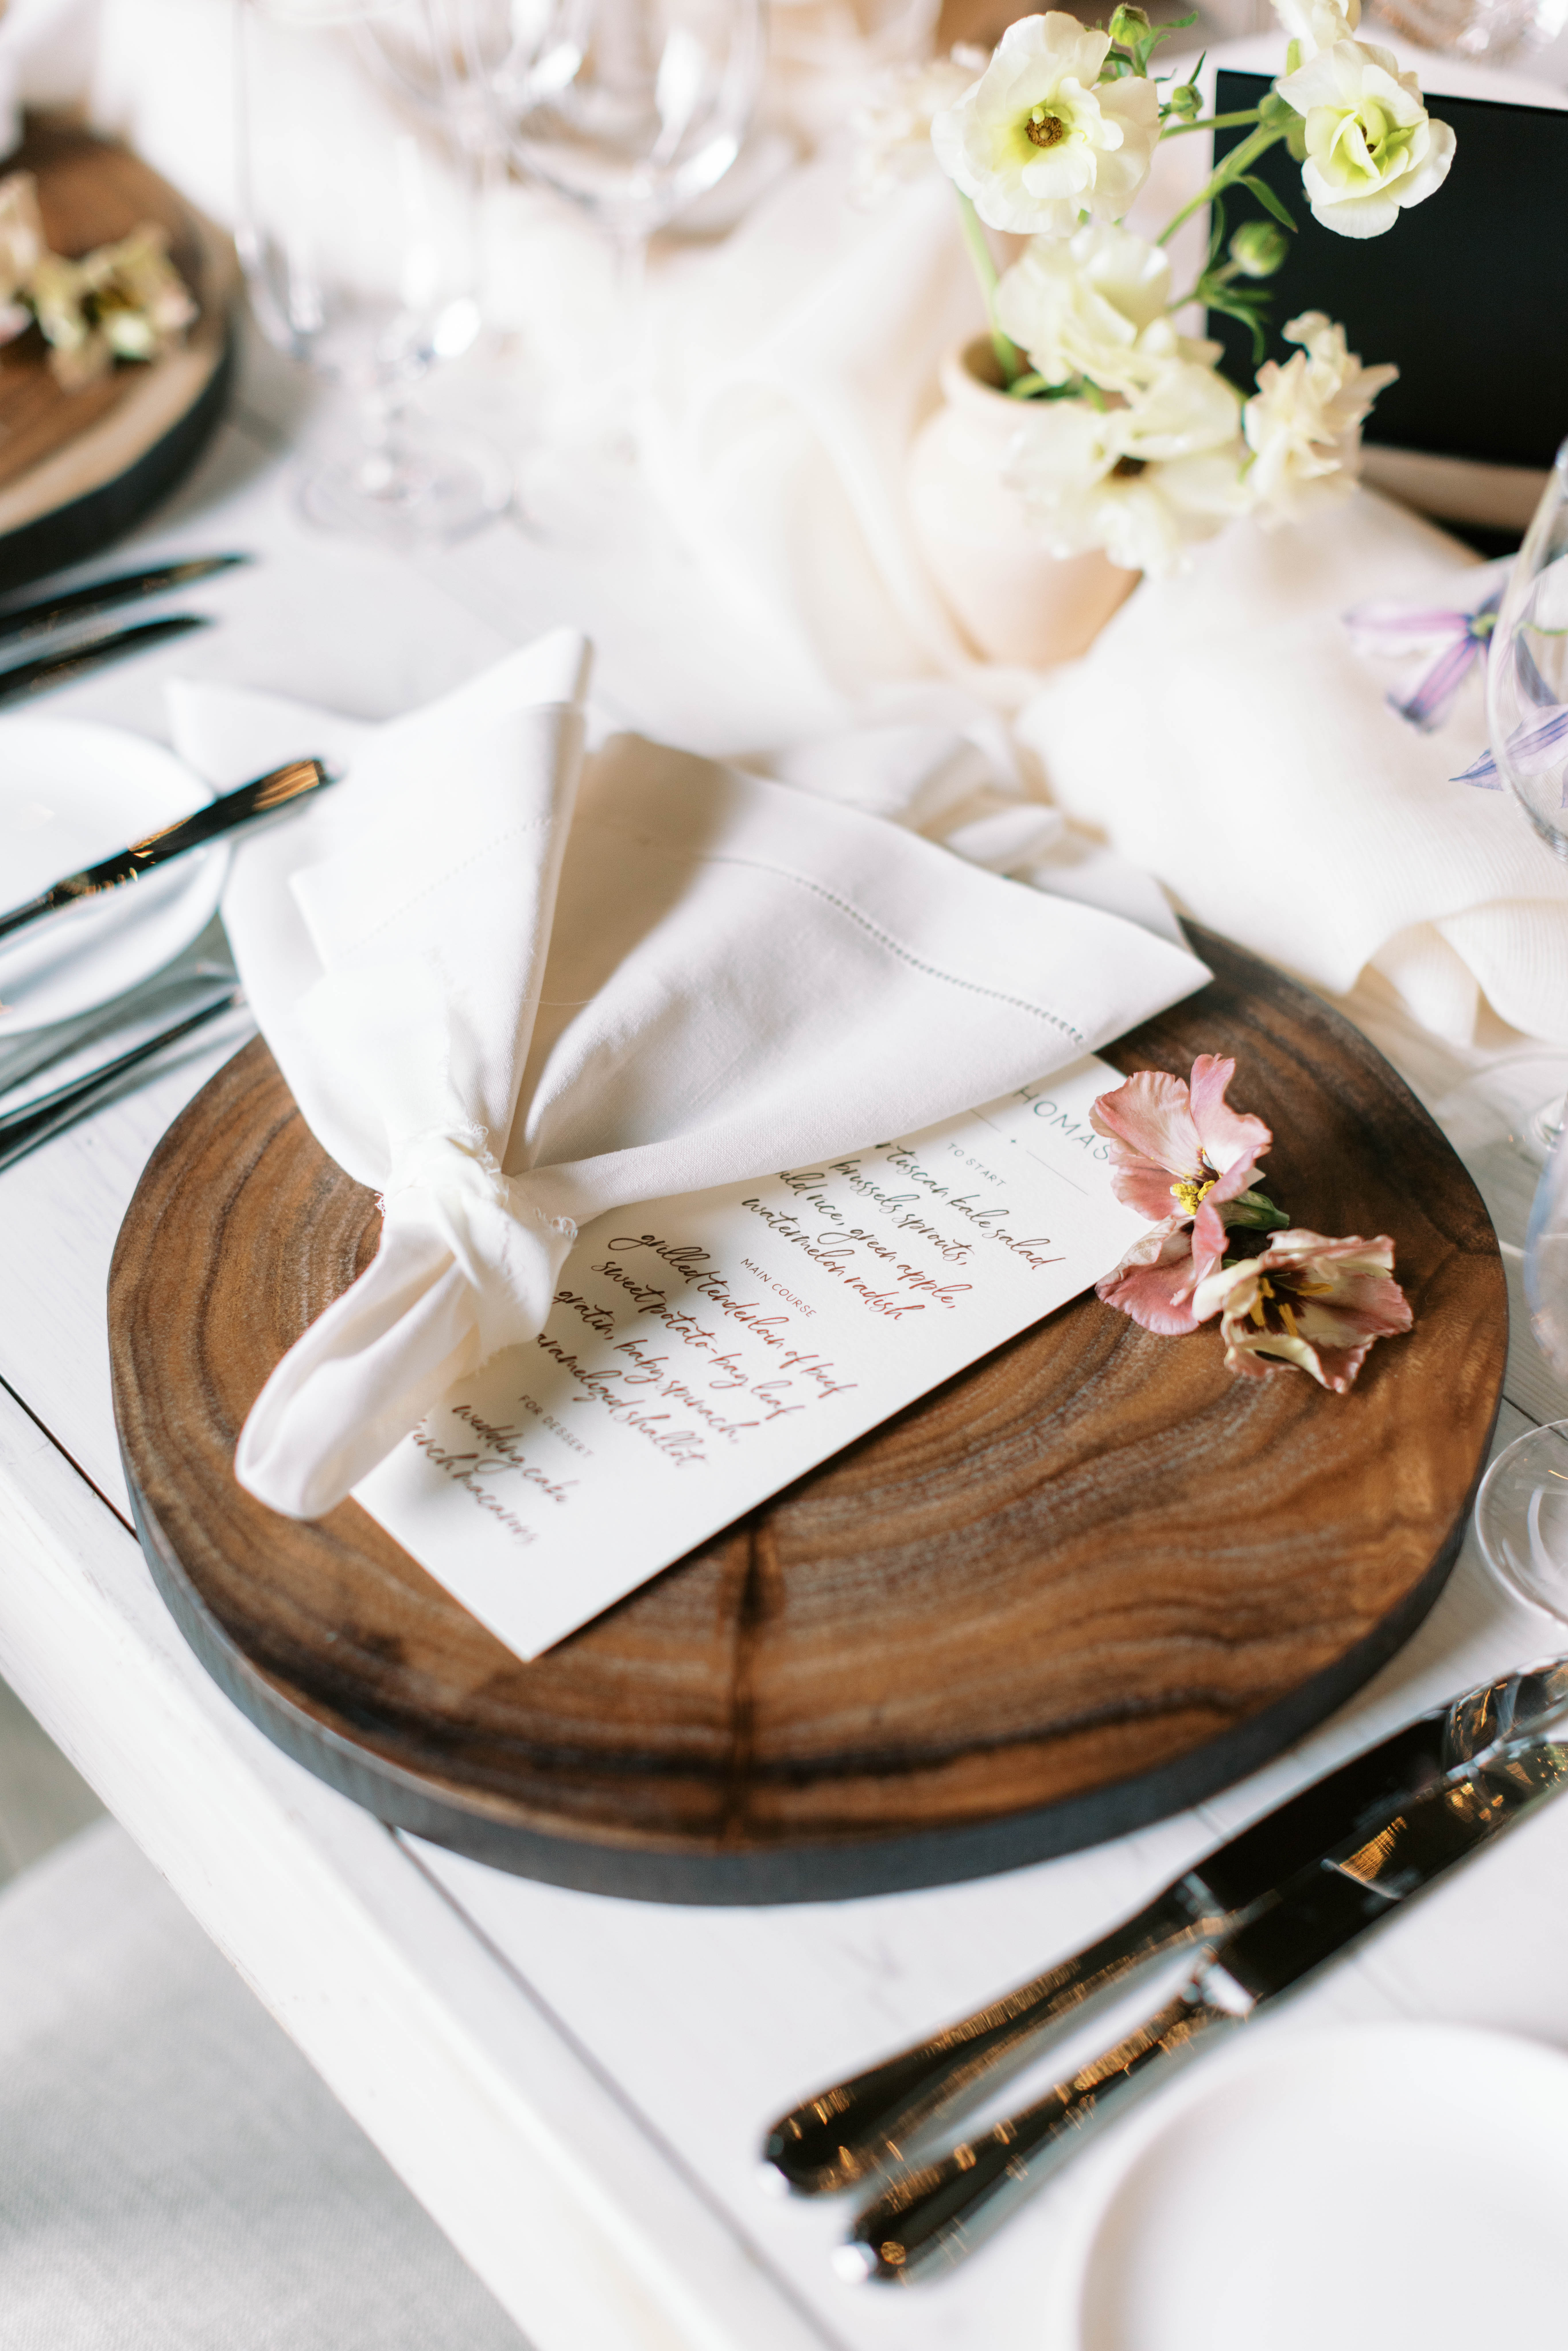 wedding table place setting with a custom menu and wooden charger for an eclectic utah ranch wedding. photo by megan robinson photography